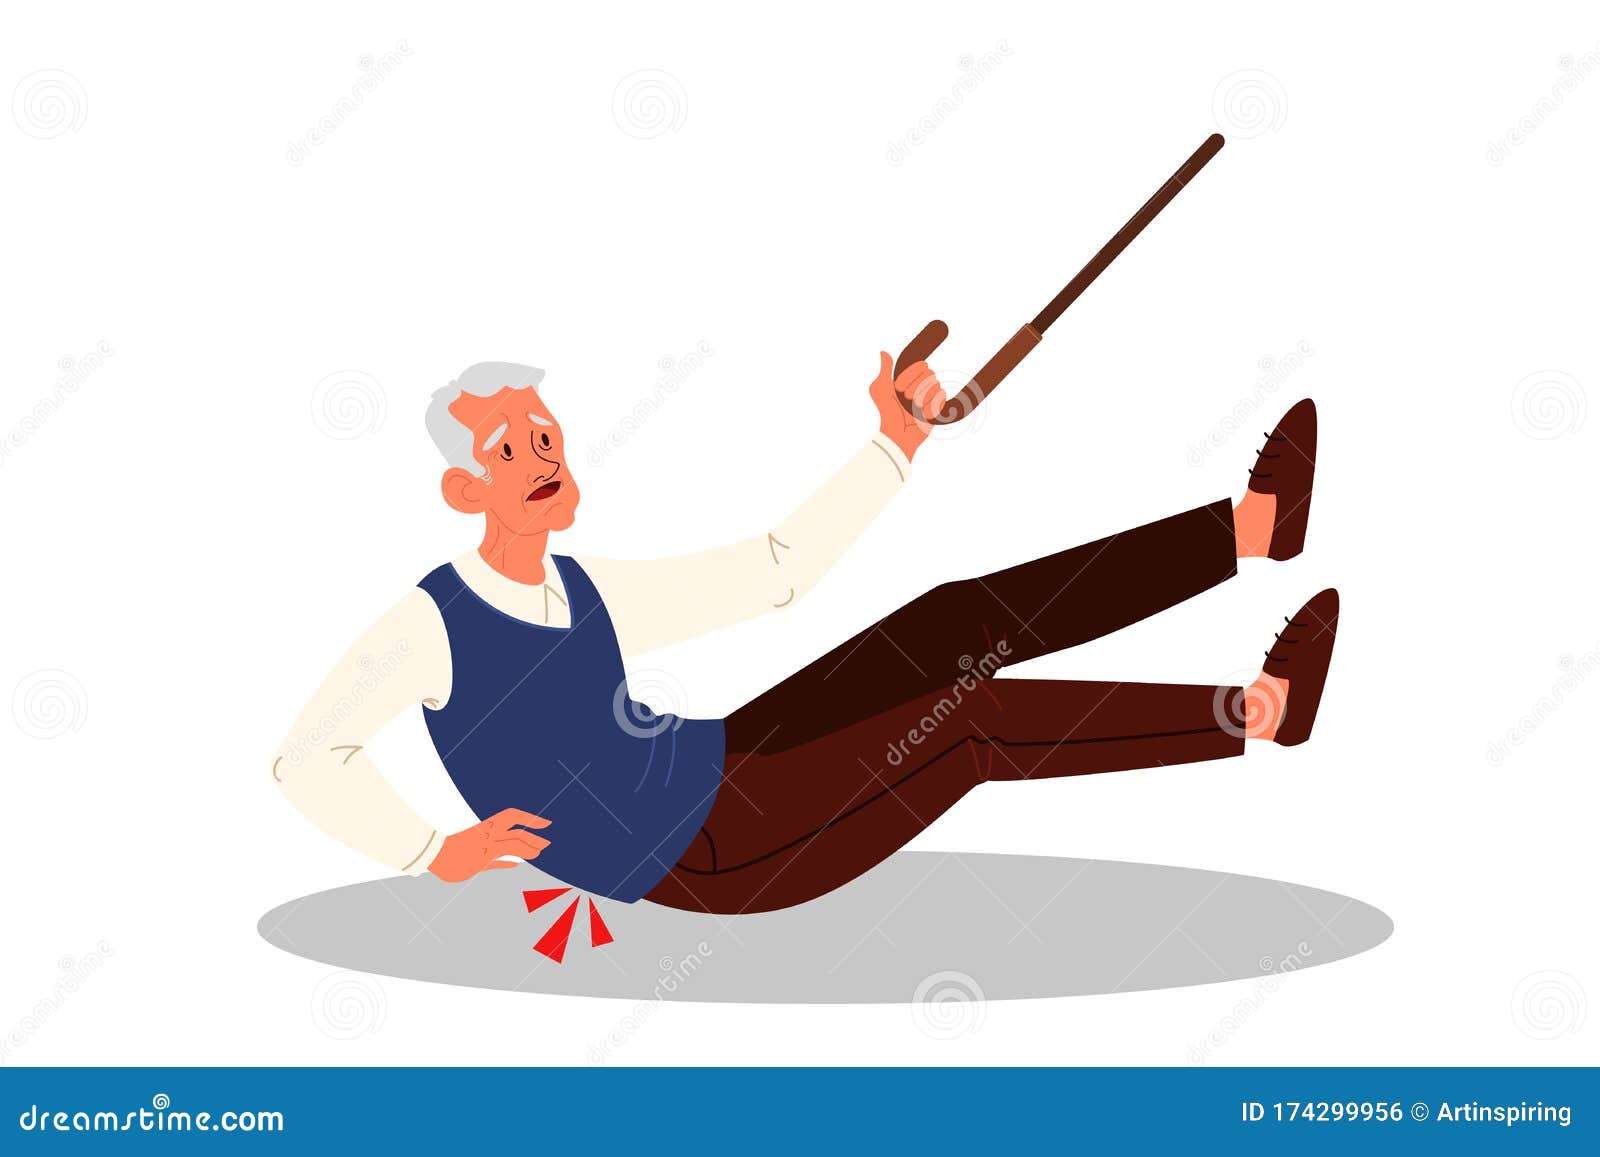 Old Person Falling Cartoon